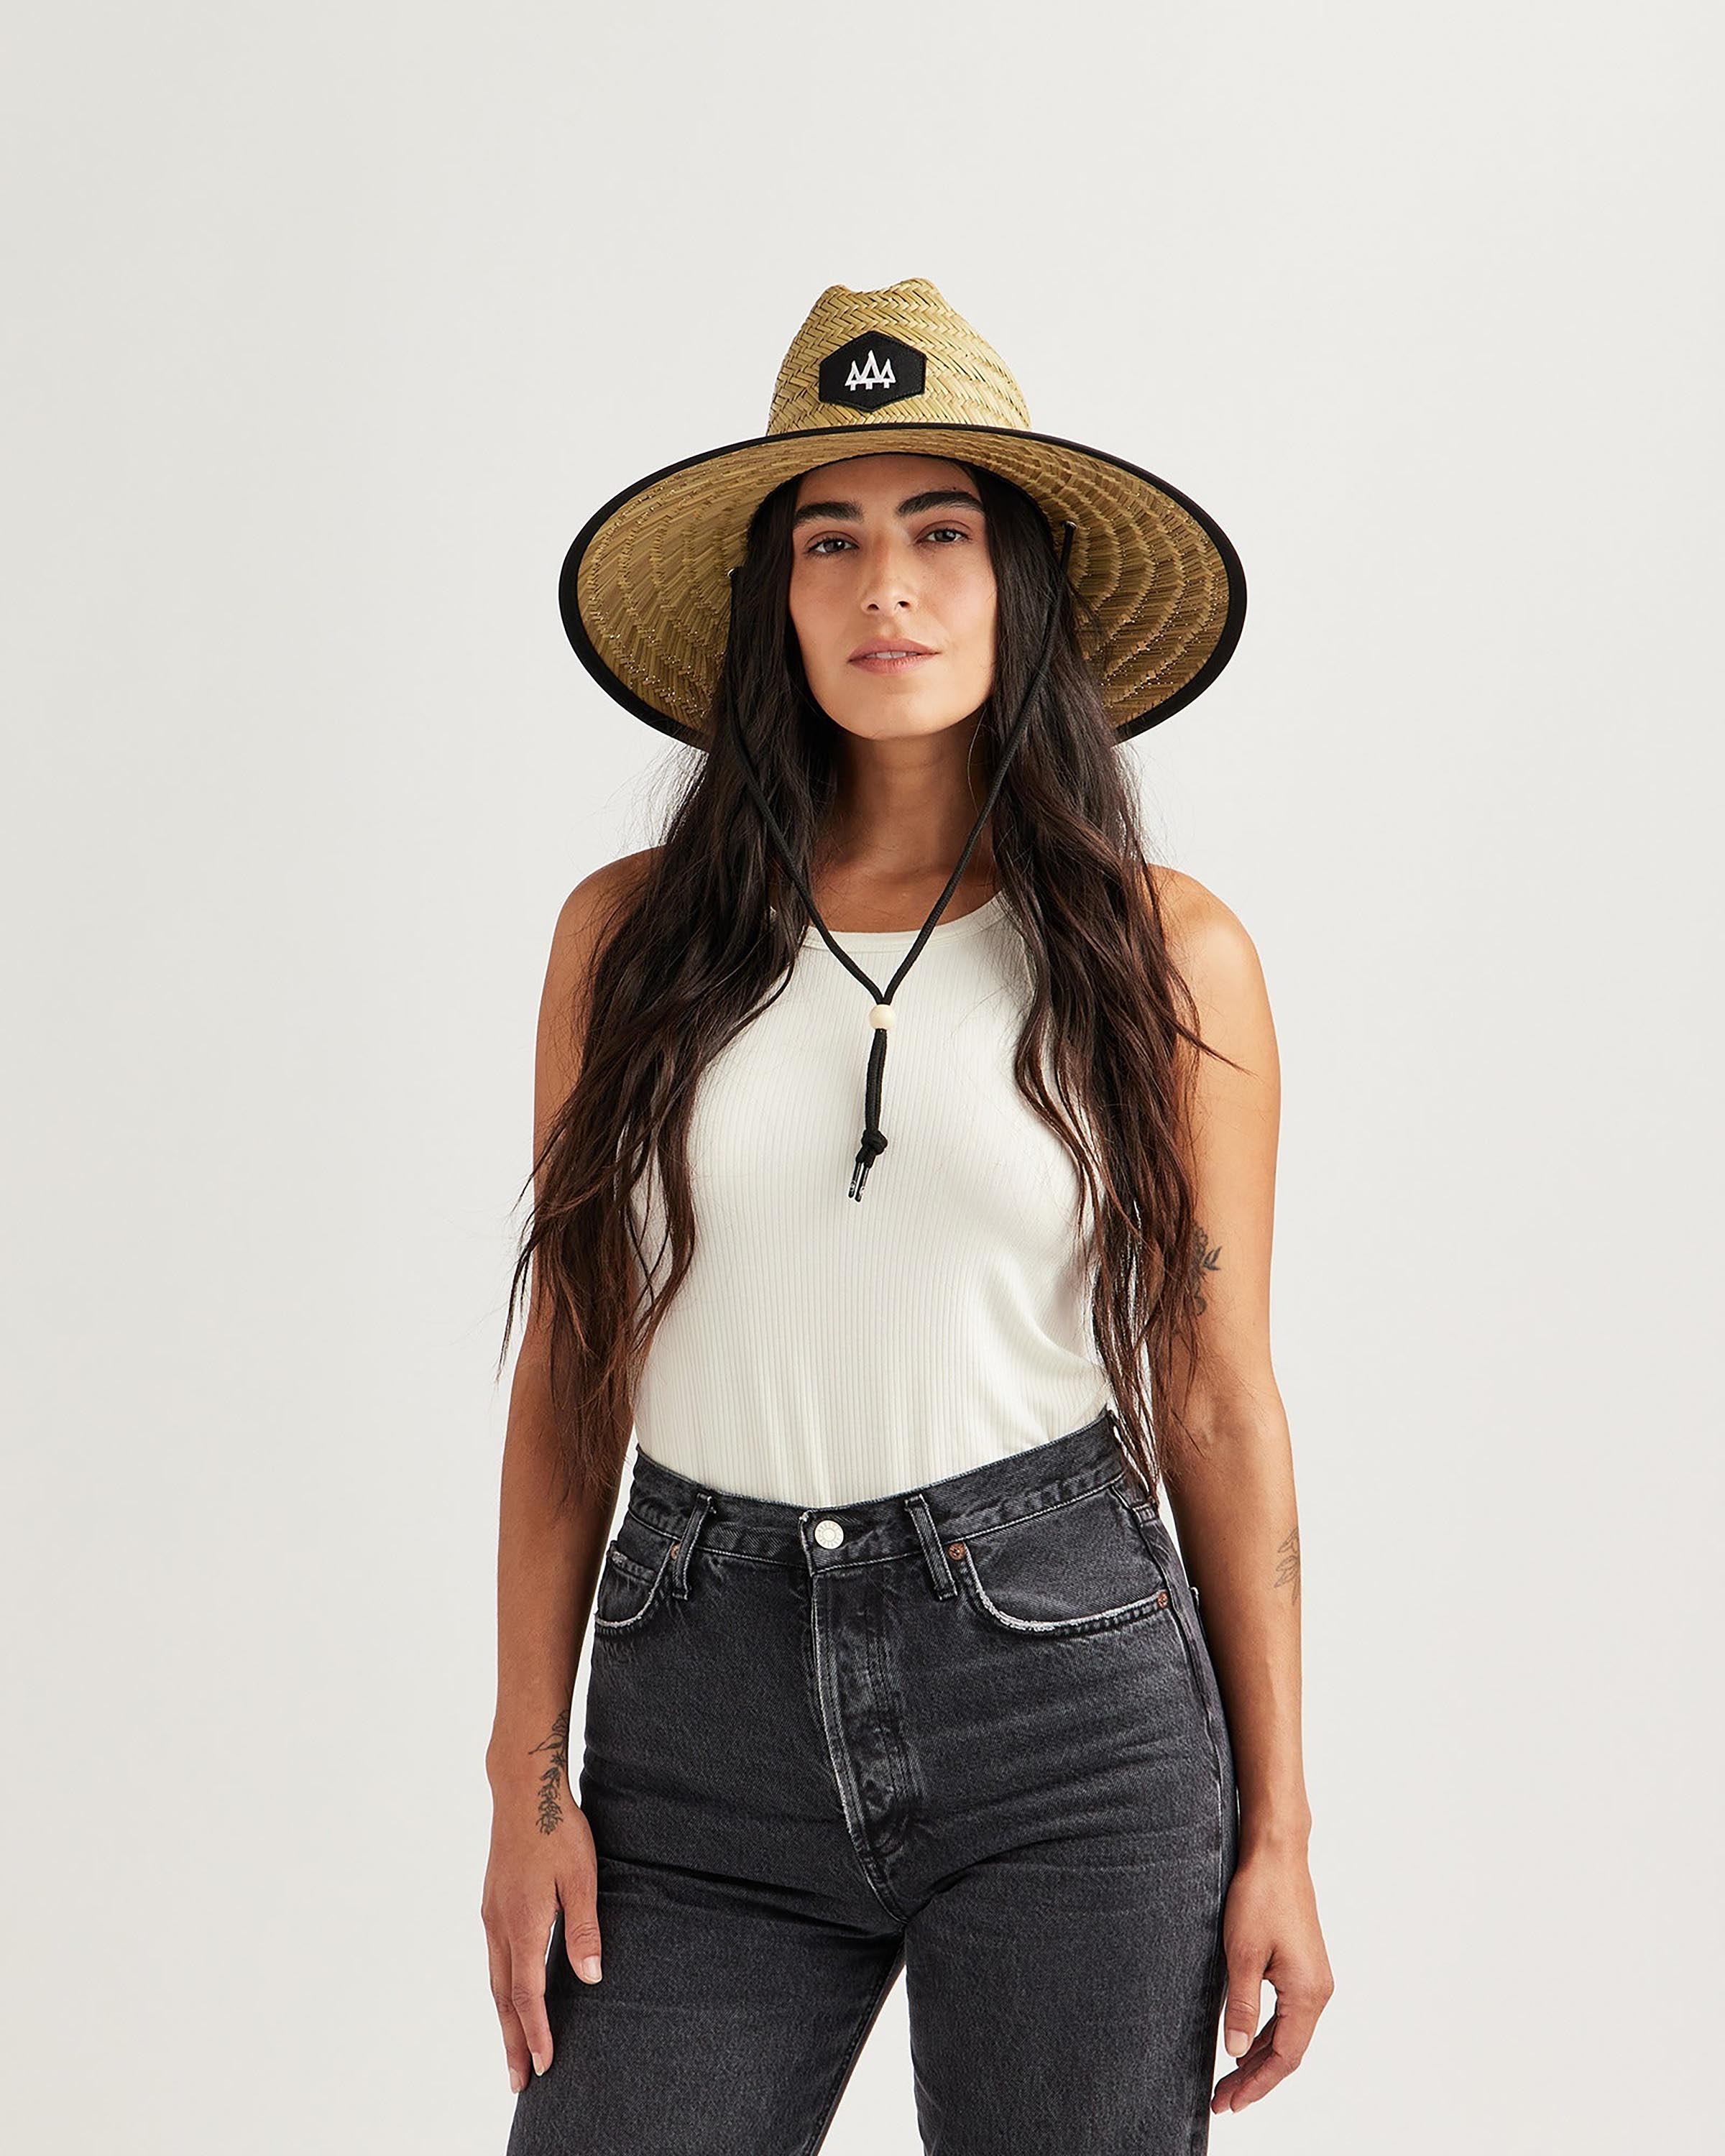 Hemlock female model looking straight wearing Midnight straw lifeguard hat with black color